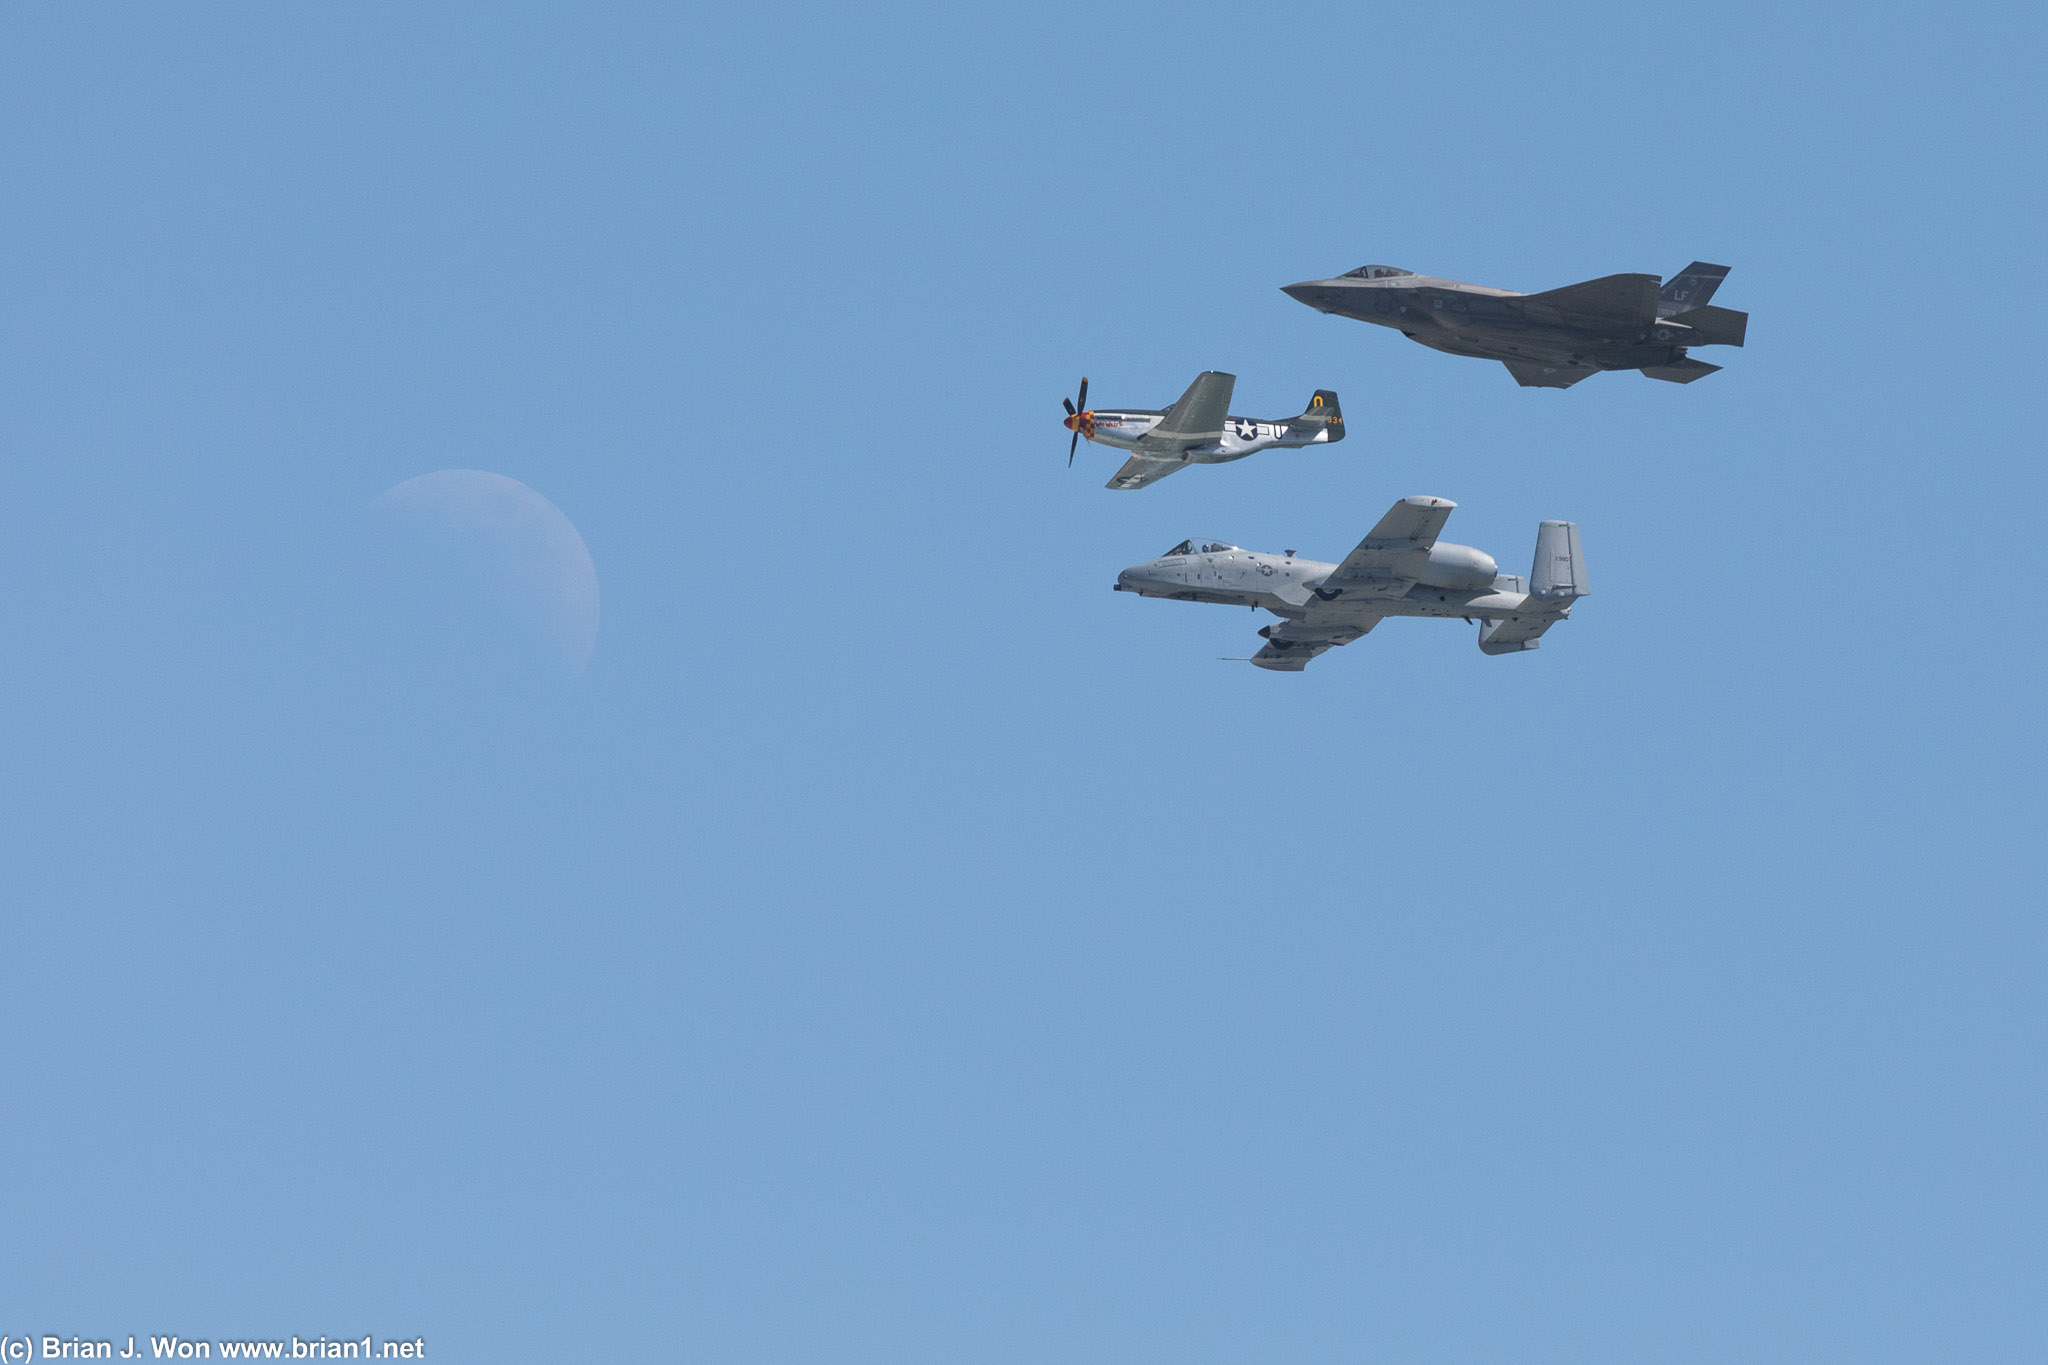 USAF Heritage Flight - F-35A, A-10C, and P-51D Mustang "Wee Willy II" piloted by USAF (ret) Major General Tommy Williams.